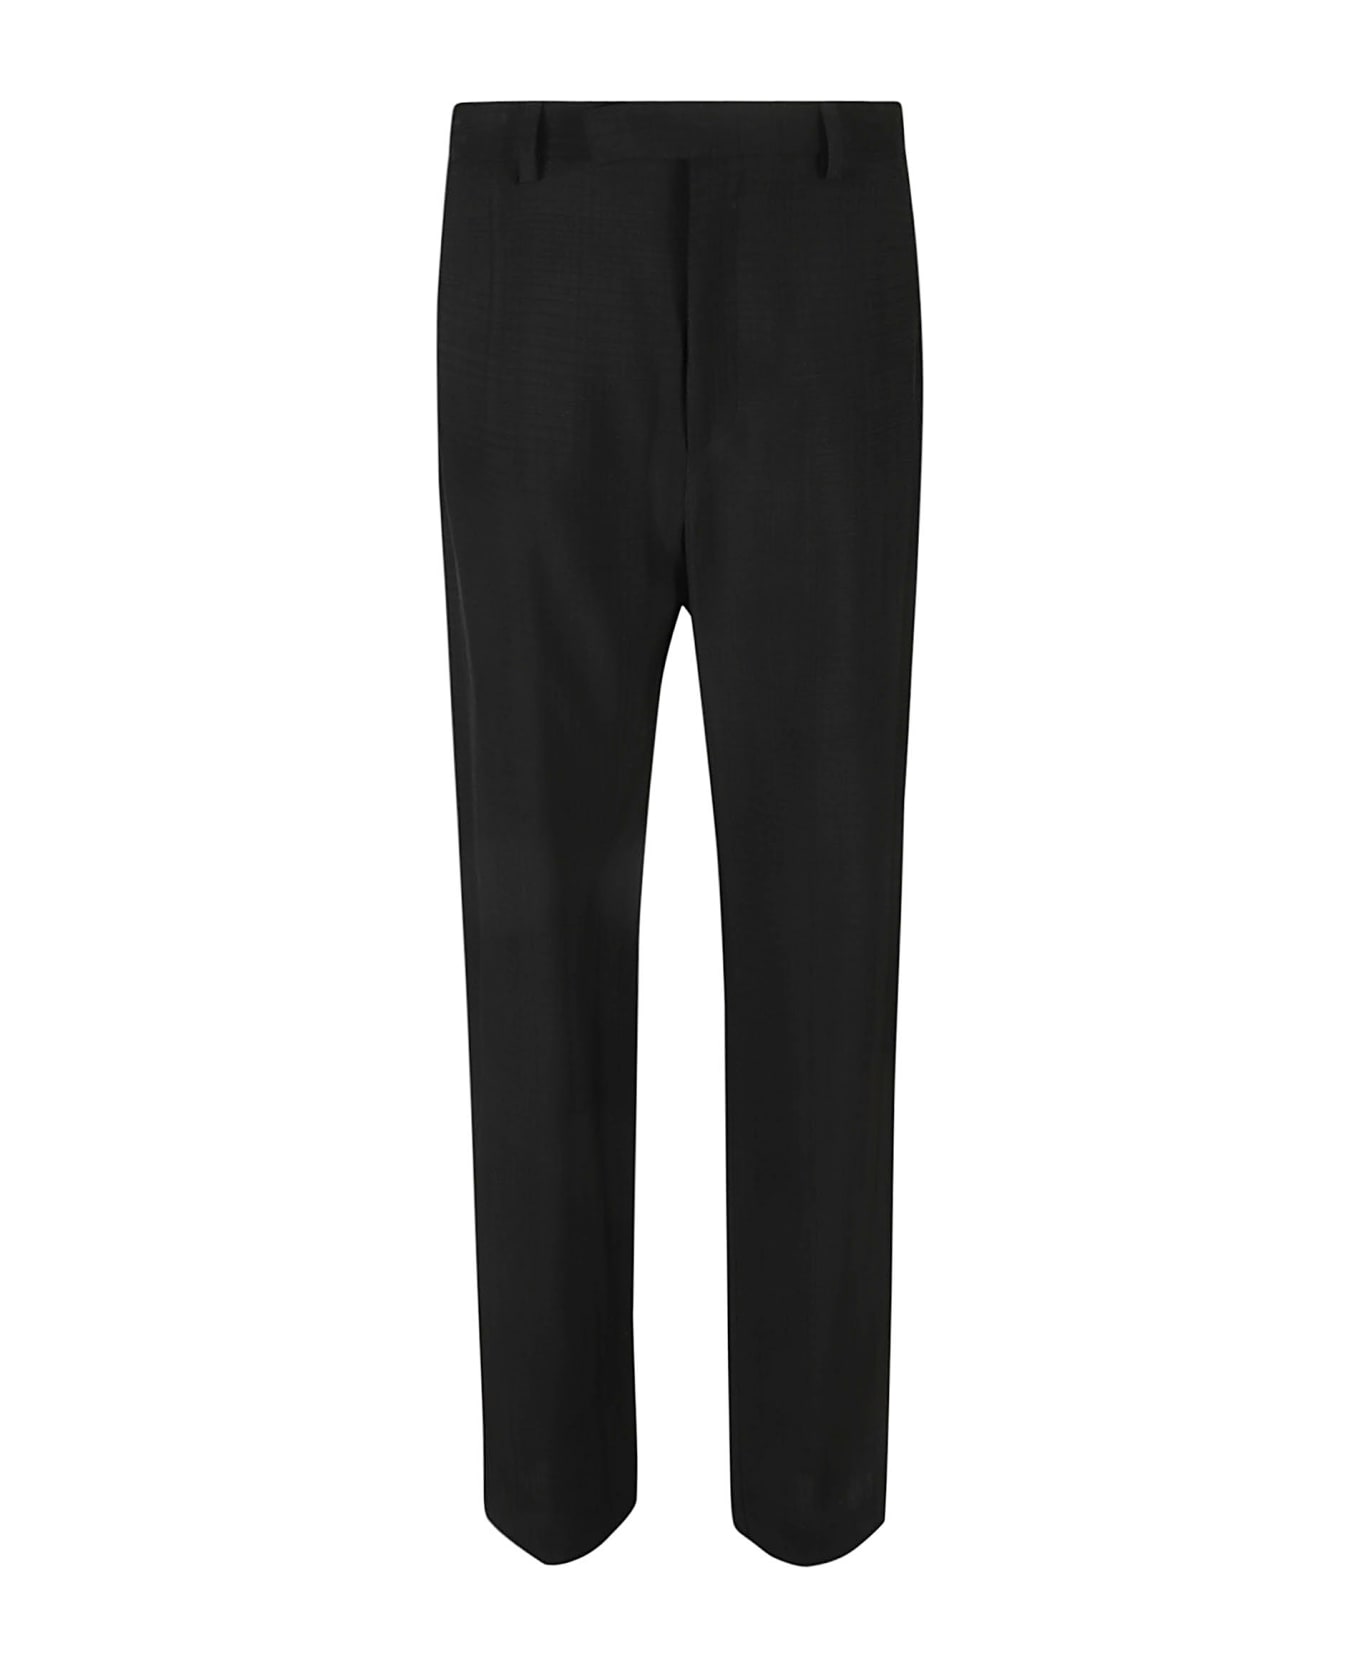 Colville Twisted Trousers - Black ボトムス